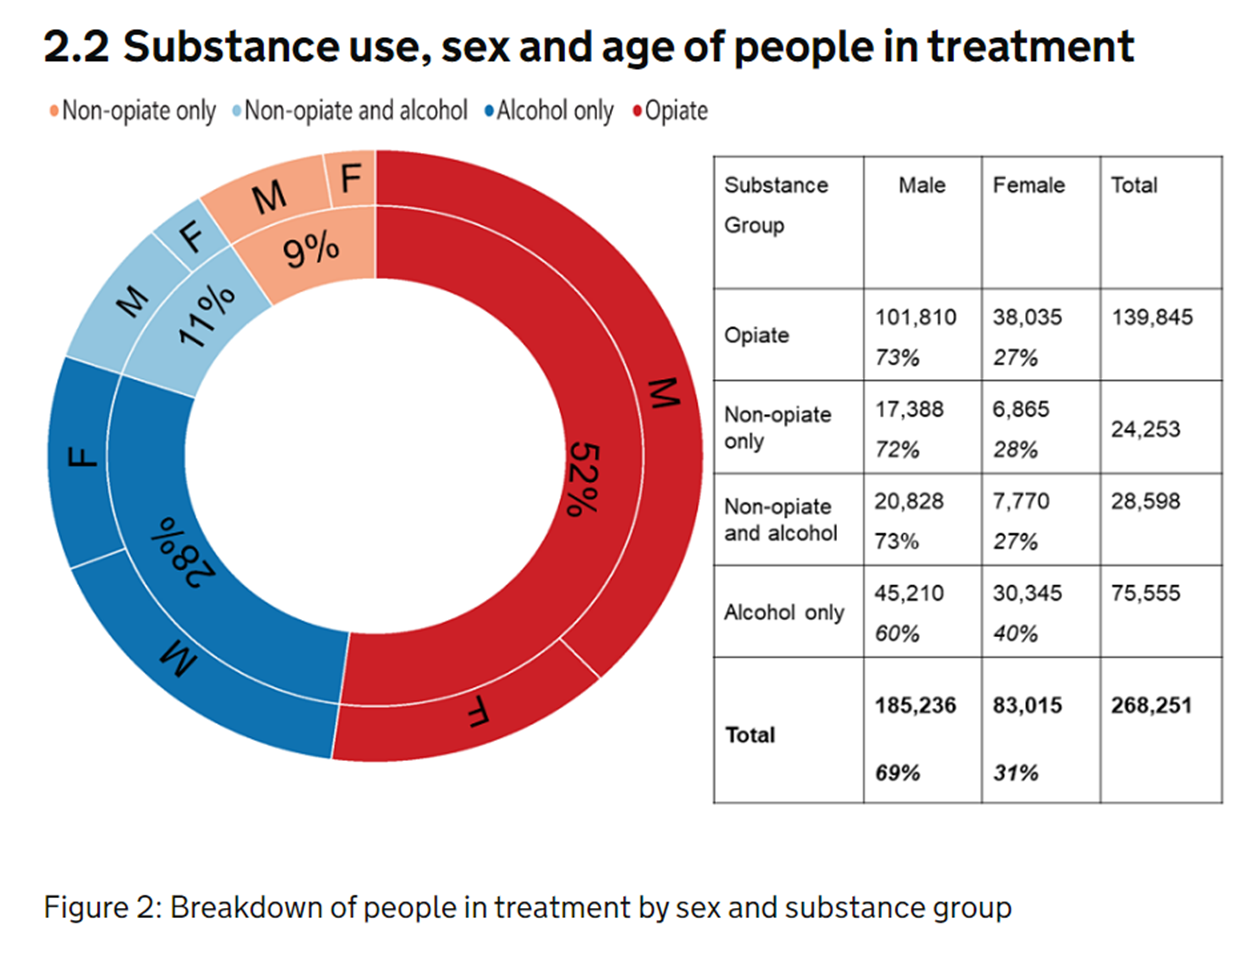 England Nov 2019 Substance use, sex and age of people in treatment